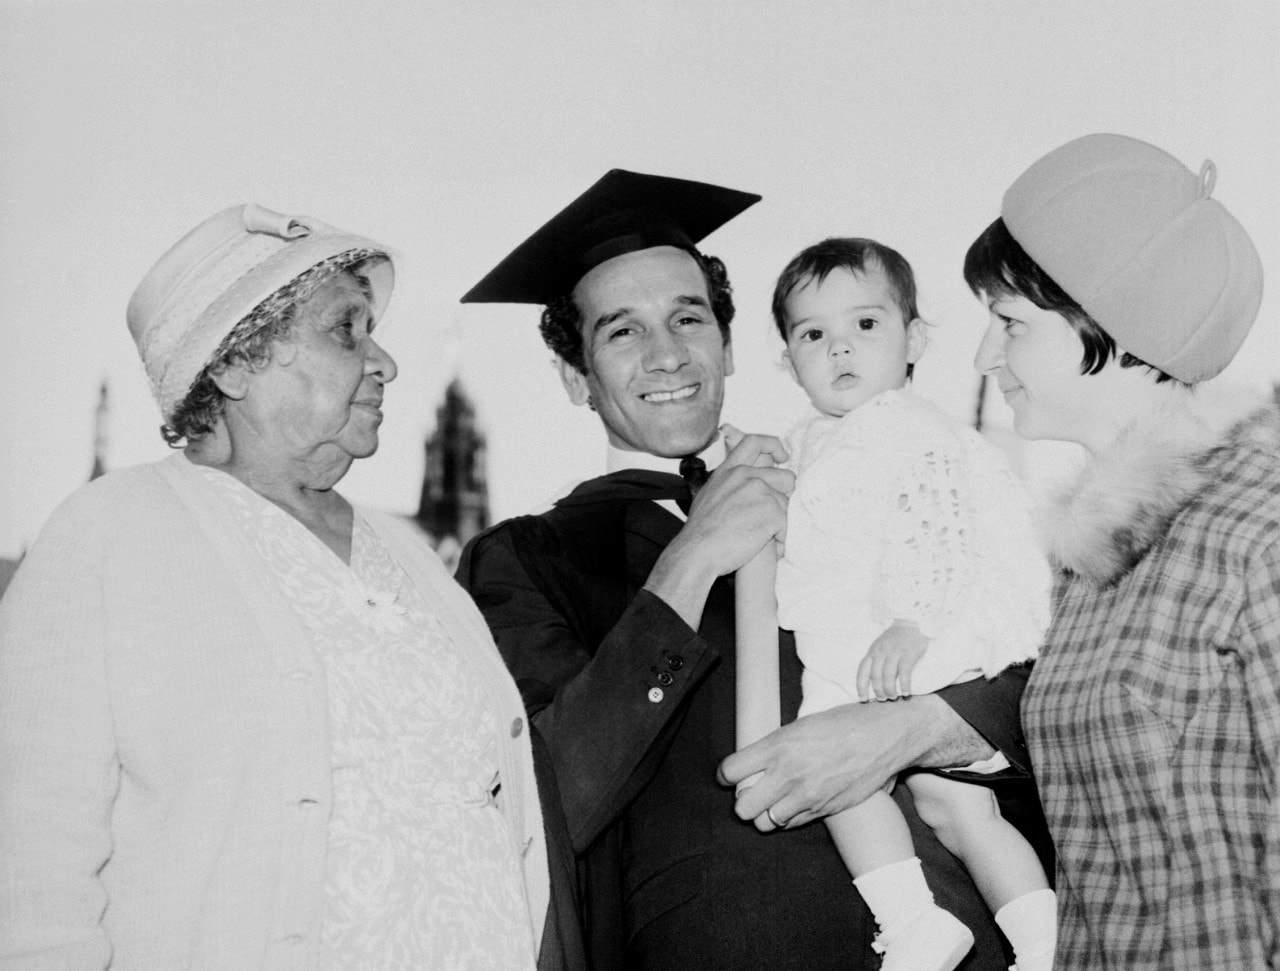 A photo of Charles Perkins with his family at his graduation at the University of Sydney. 11 May 1966.